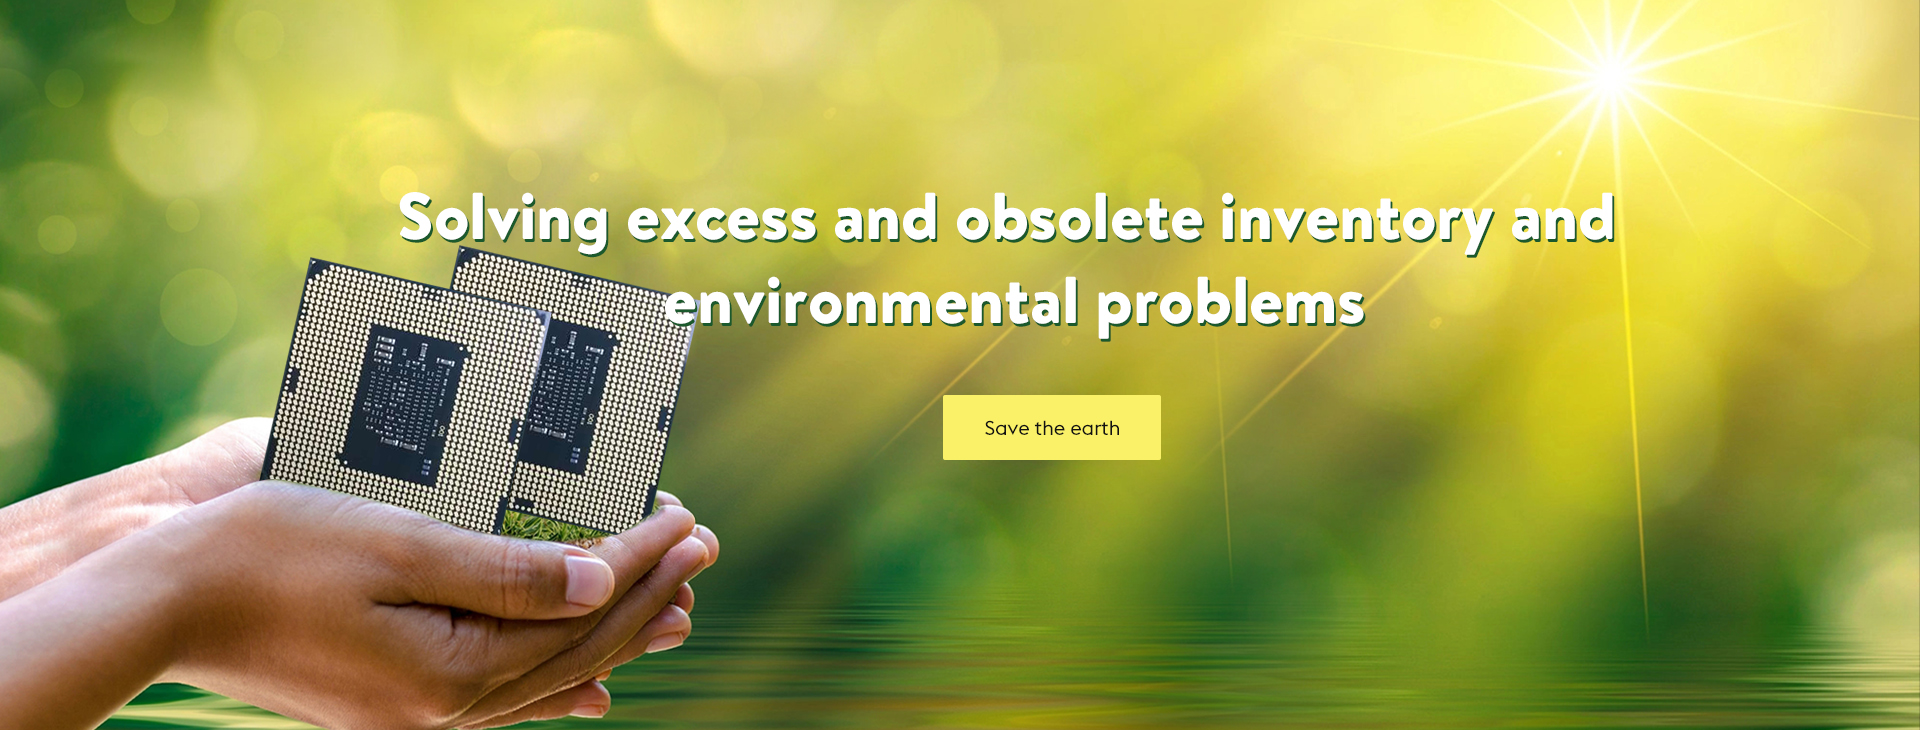 Solving excess and obsolete inventory and environmental problems.